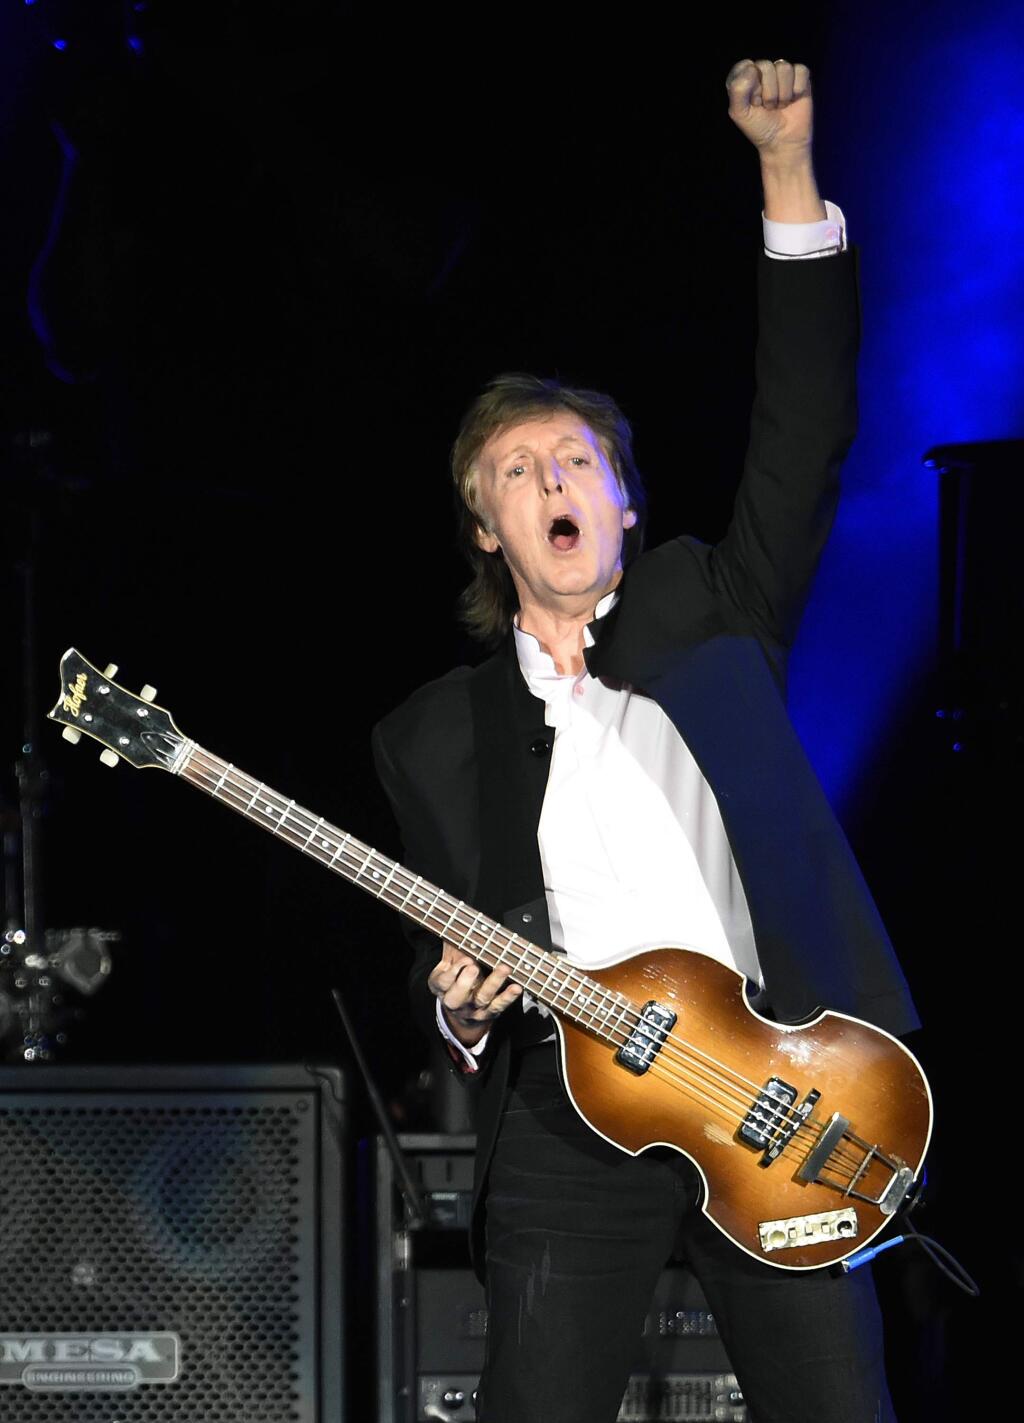 Paul McCartney performs on day 2 of the 2016 Desert Trip music festival at Empire Polo Field on Saturday, Oct. 8, 2016, in Indio, Calif. (Photo by Chris Pizzello/Invision/AP)